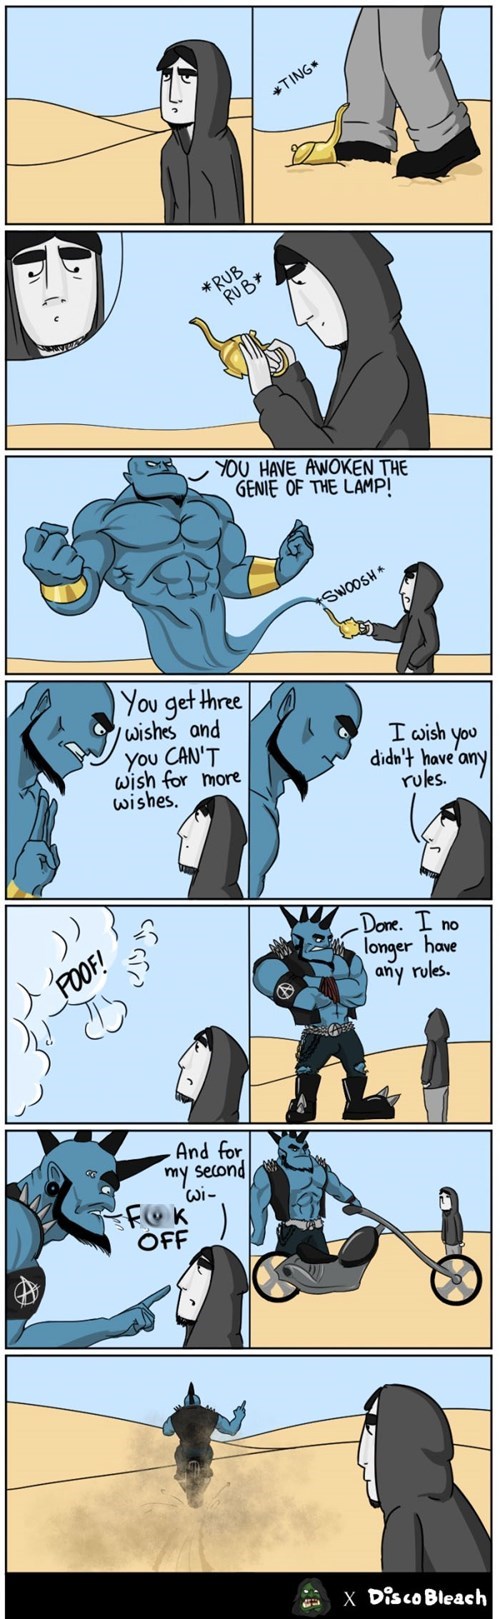 how to free a genie by accident, comic